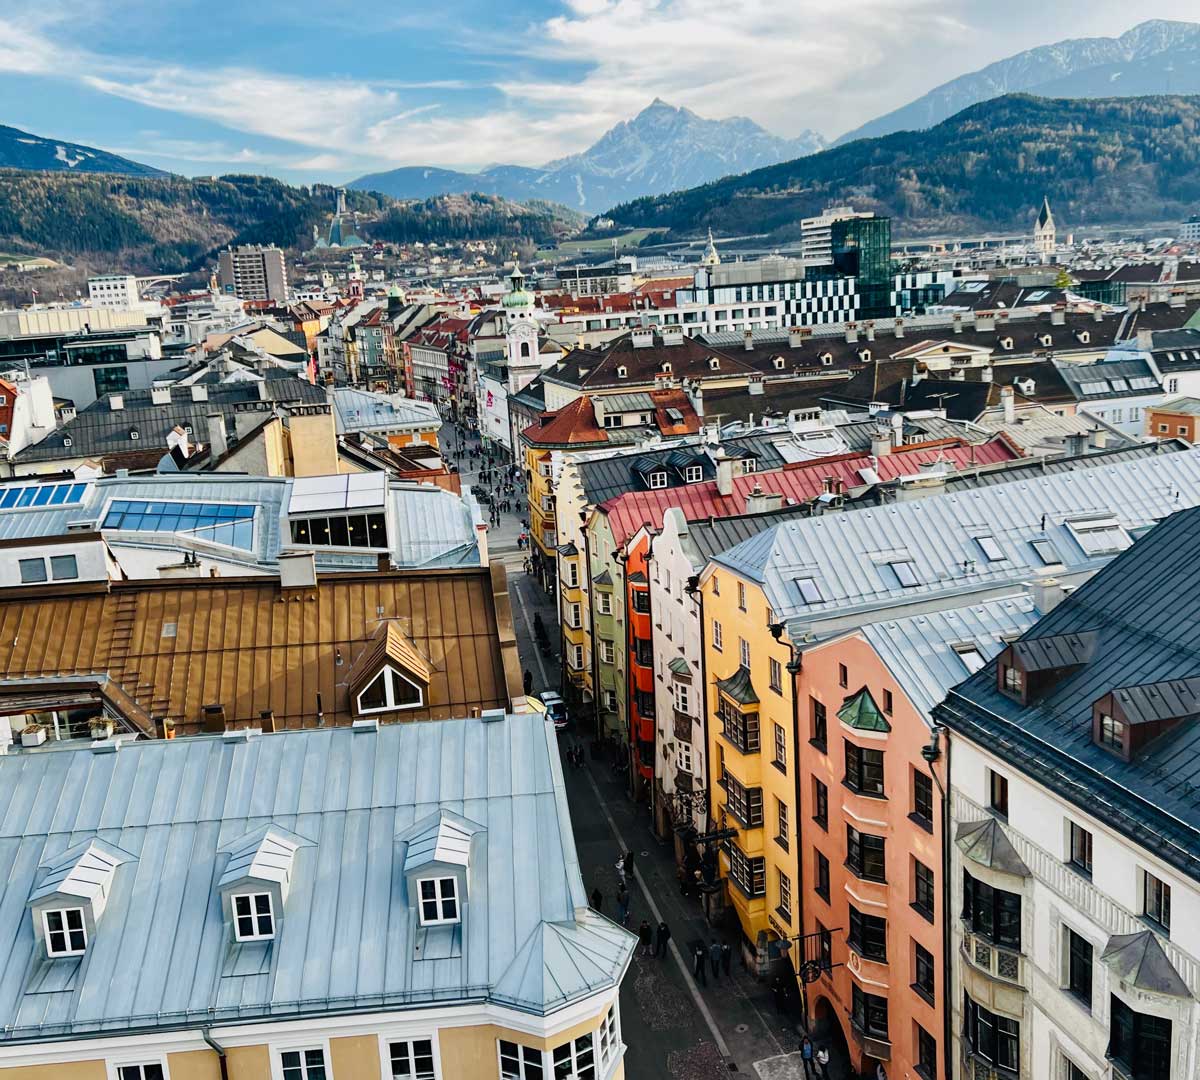 A view of the colorful homes and rooftops from the Innsbruck City Tower.